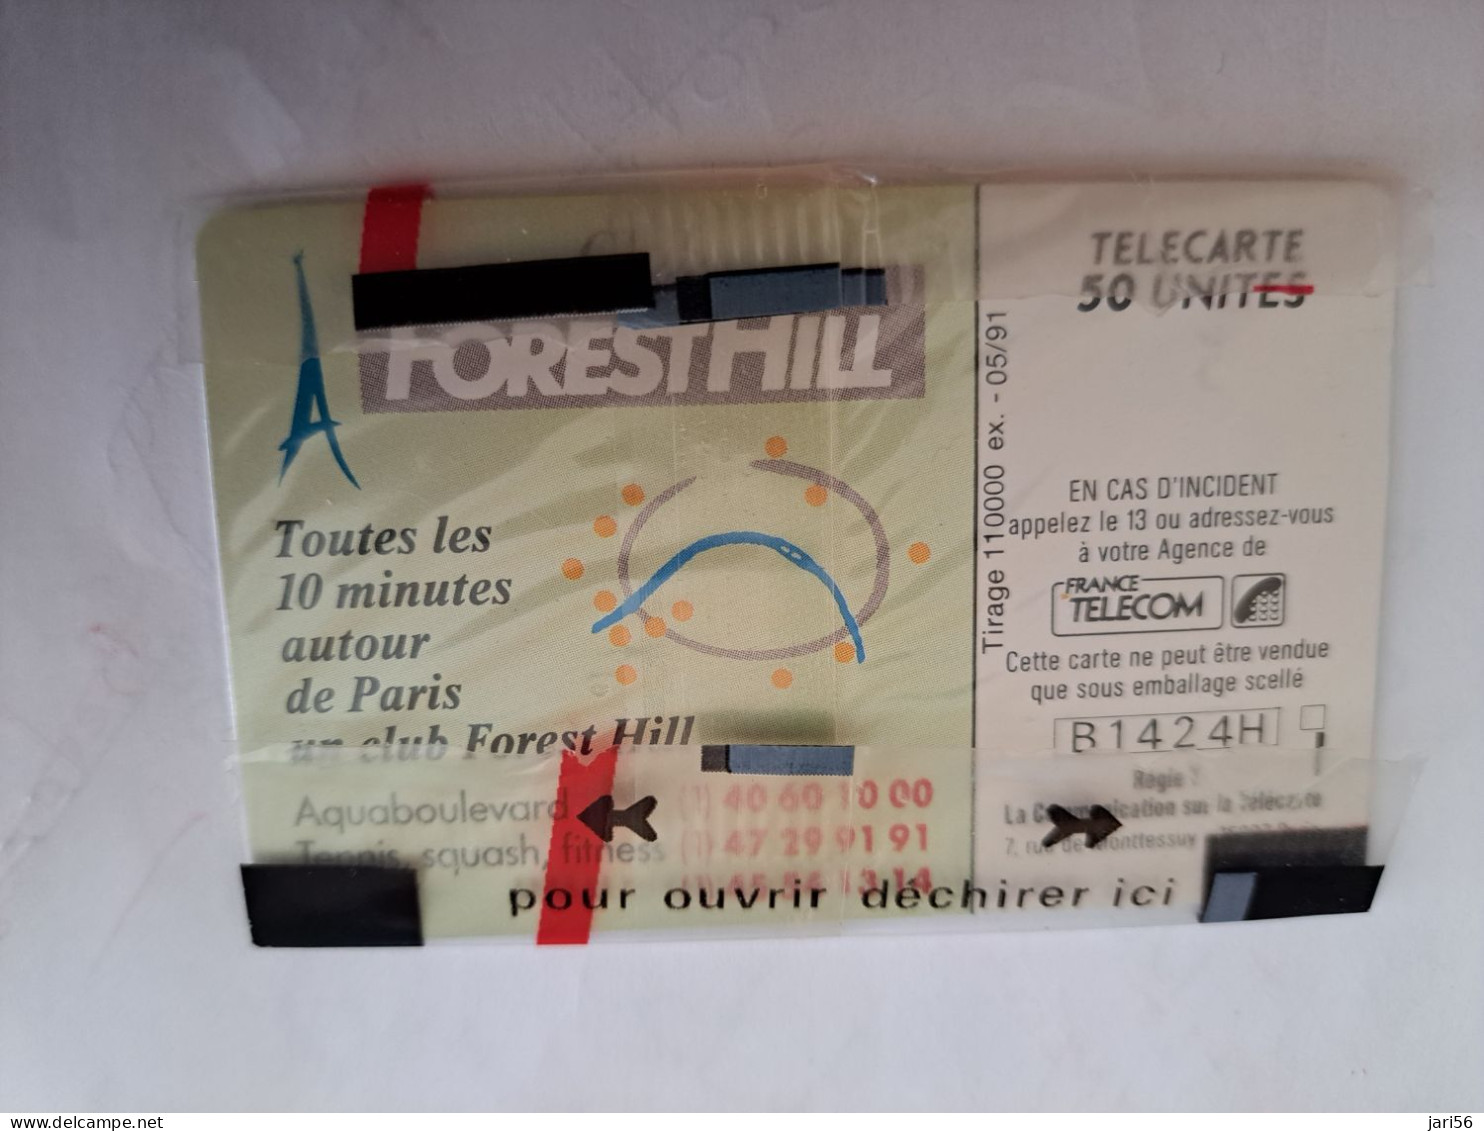 FRANCE/FRANKRIJK   CHIPCARD   50 UNITS / FOREST HILL    MINT IN WRAPPER     WITH CHIP     ** 14111** - Mobicartes (GSM/SIM)